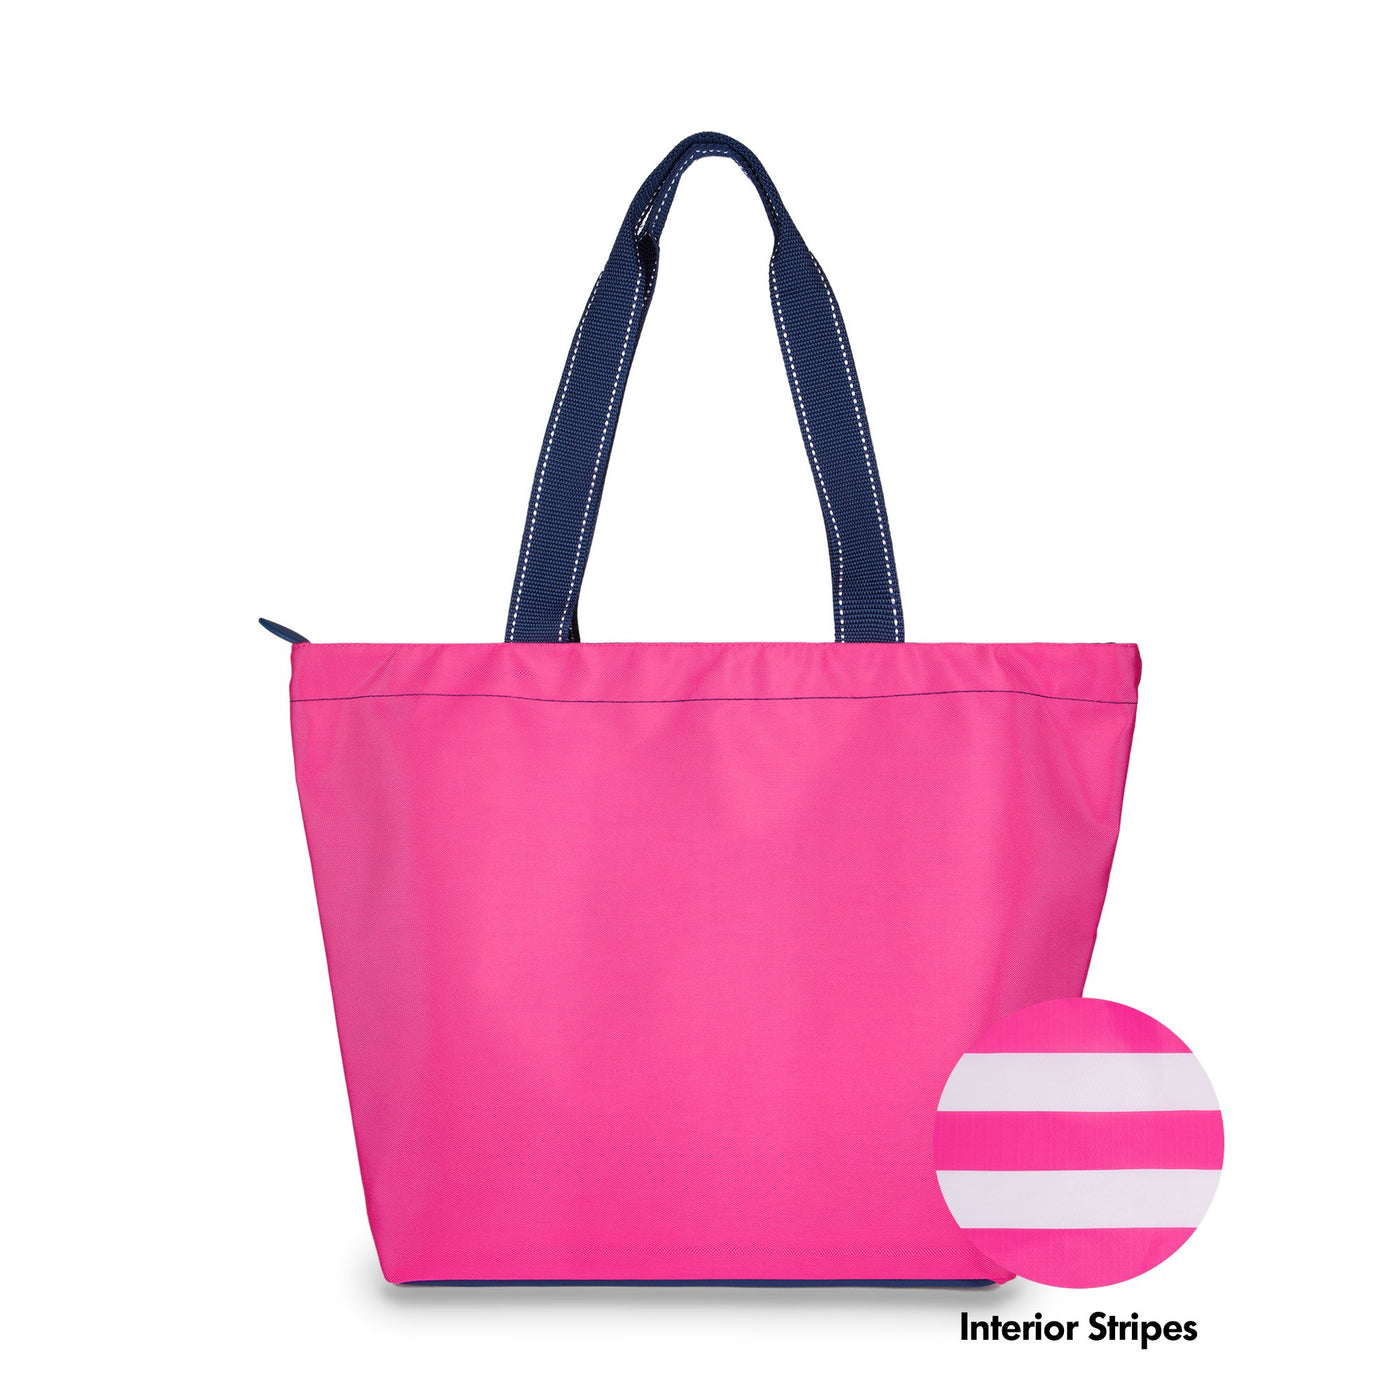 pink nylon tote bag with navy straps with a swatch next to it to show that the interior is hot pink and white stripes